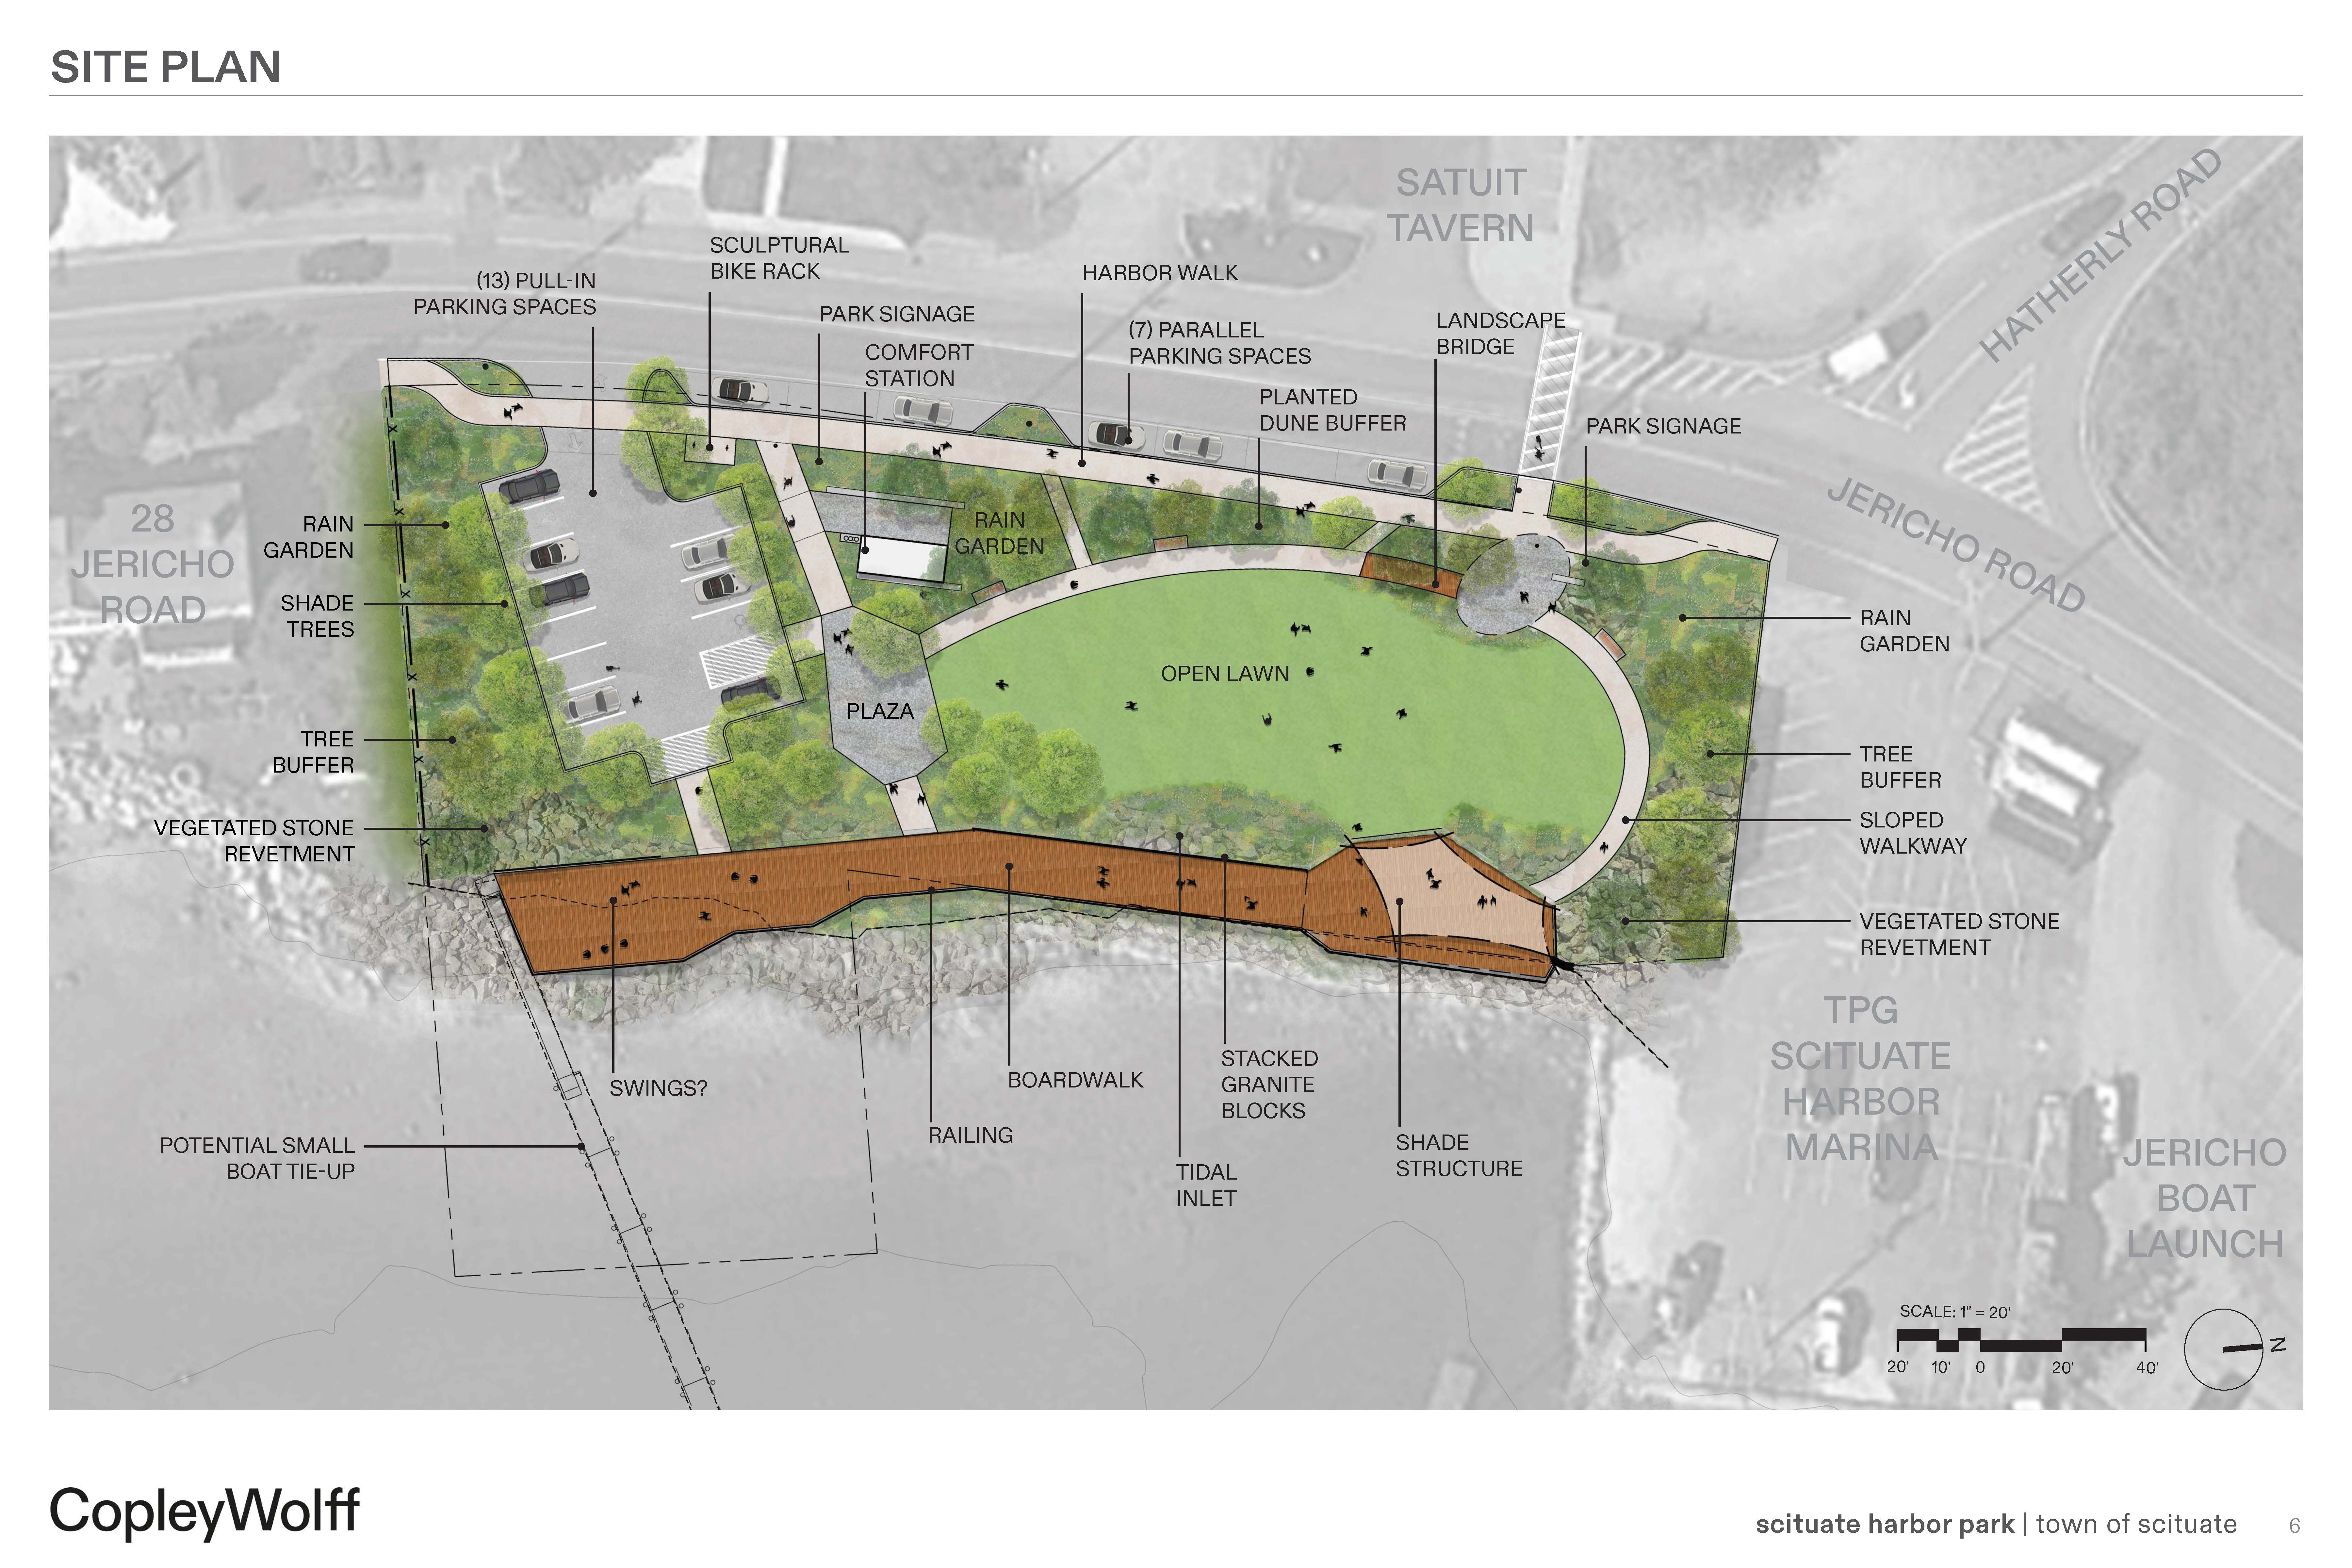 Proposed sketch of site with boardwalk, parking lot, and landscape